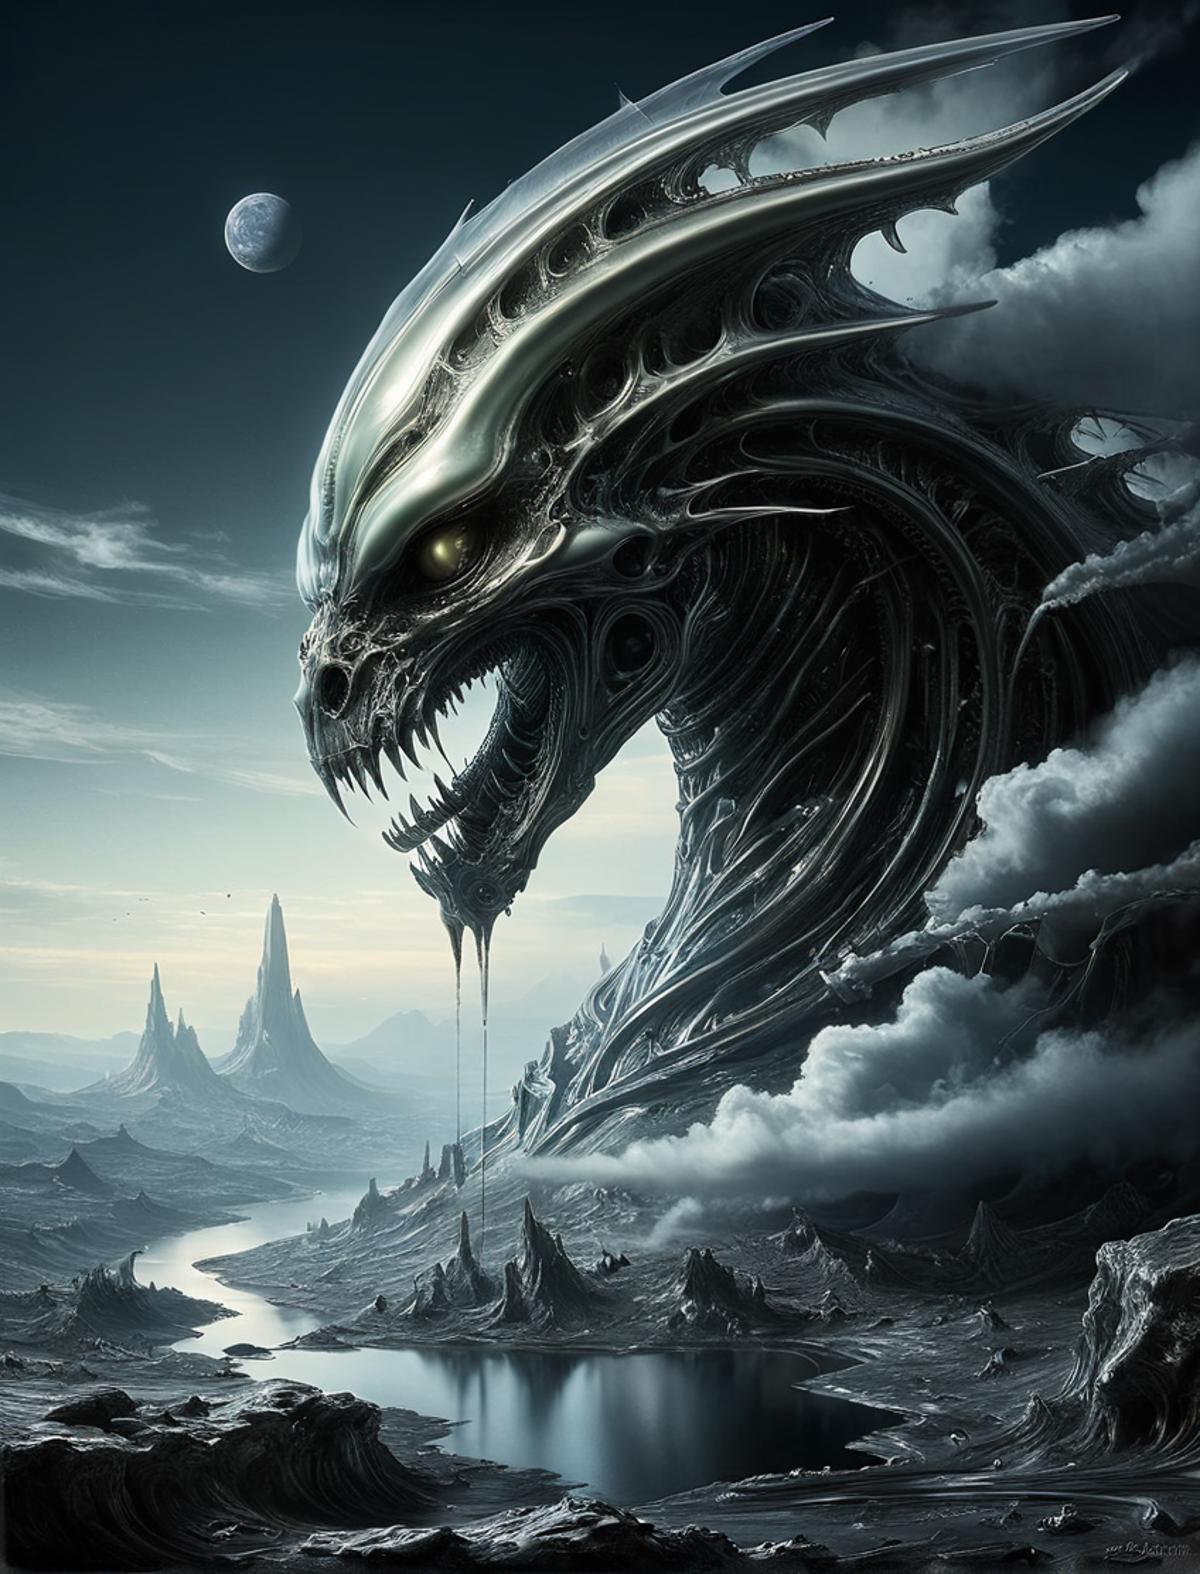 An Alien Creature with Large Teeth in the Sky, Surrounded by Mountains and Clouds